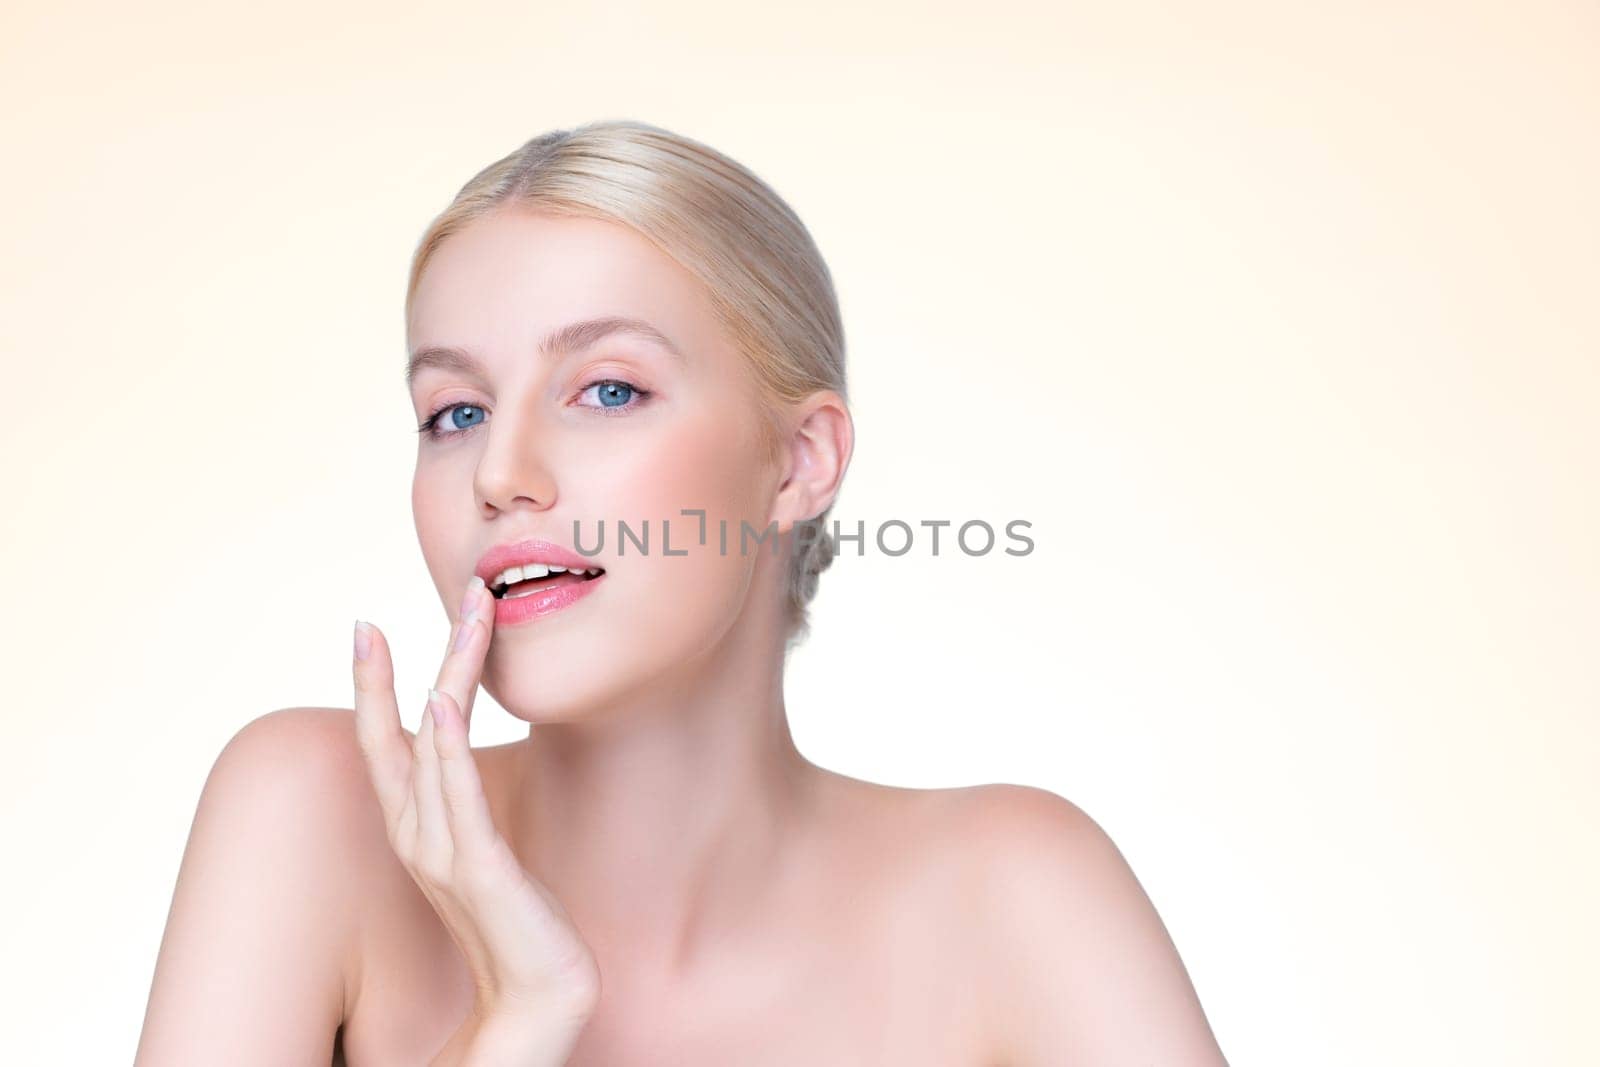 Personable beautiful woman portrait with perfect smooth clean skin and natural makeup portrait in isolated background. Hand gesture with expressive facial expression for beauty model concept.